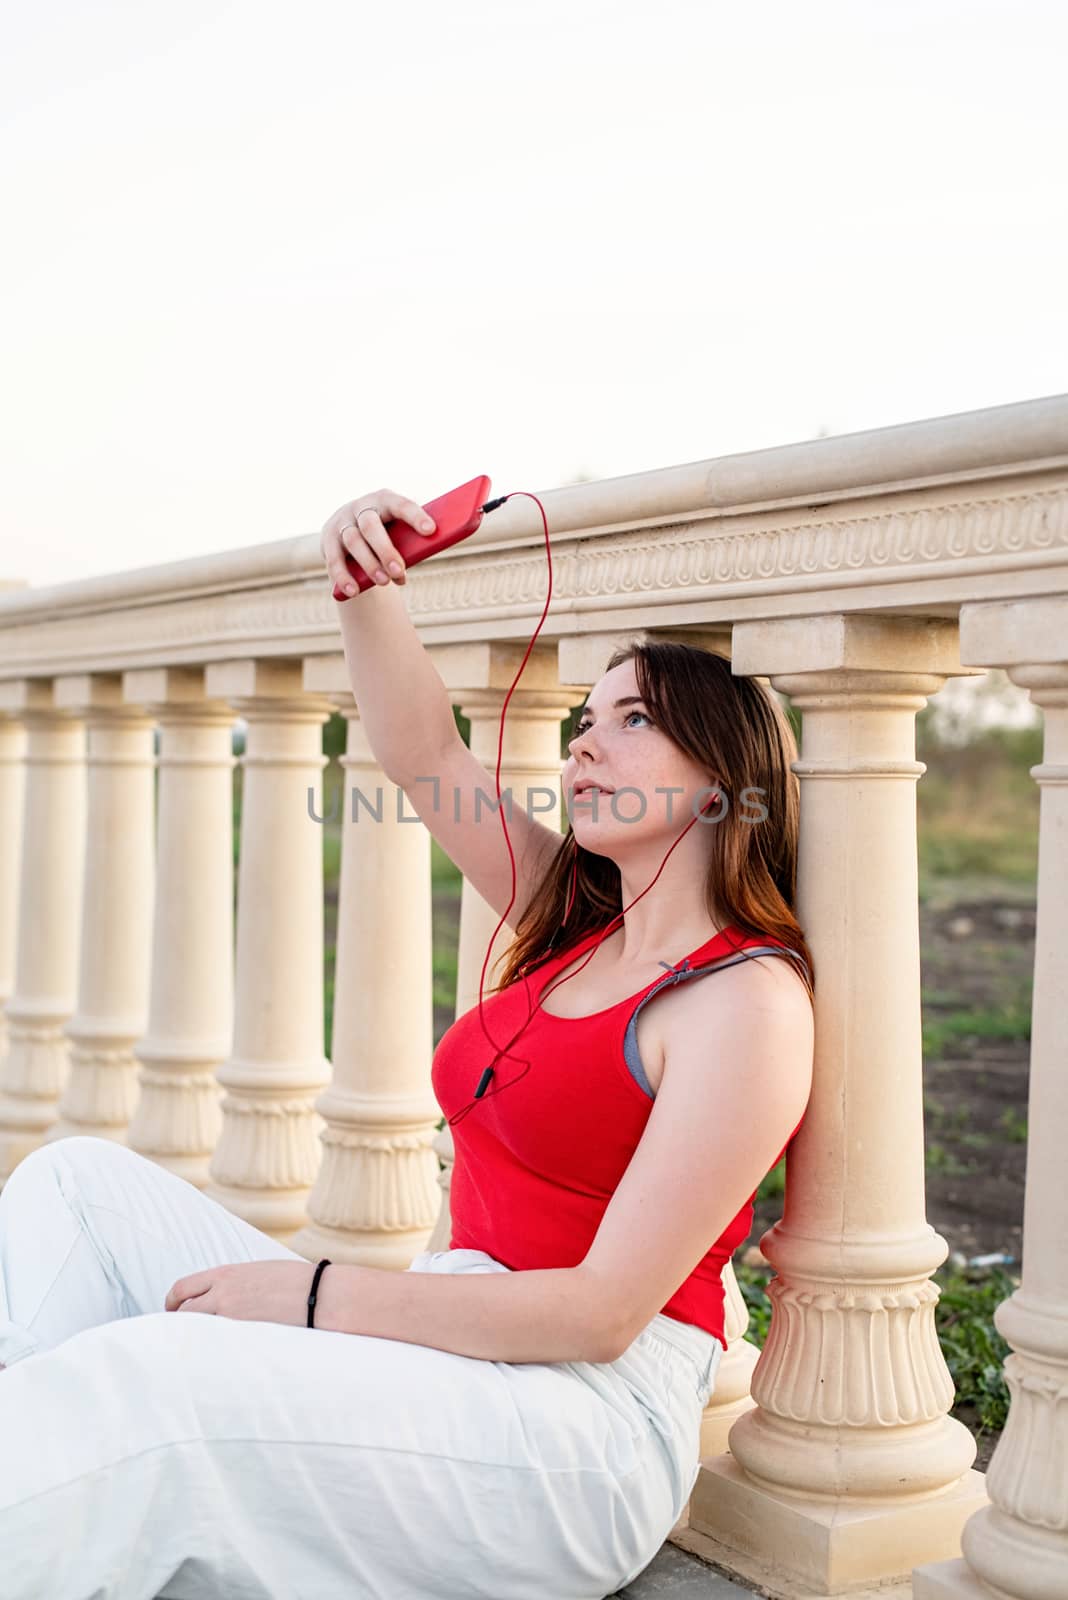 Teenage girl sitting next to column making selfie and listening to the music in the park at sunset by Desperada